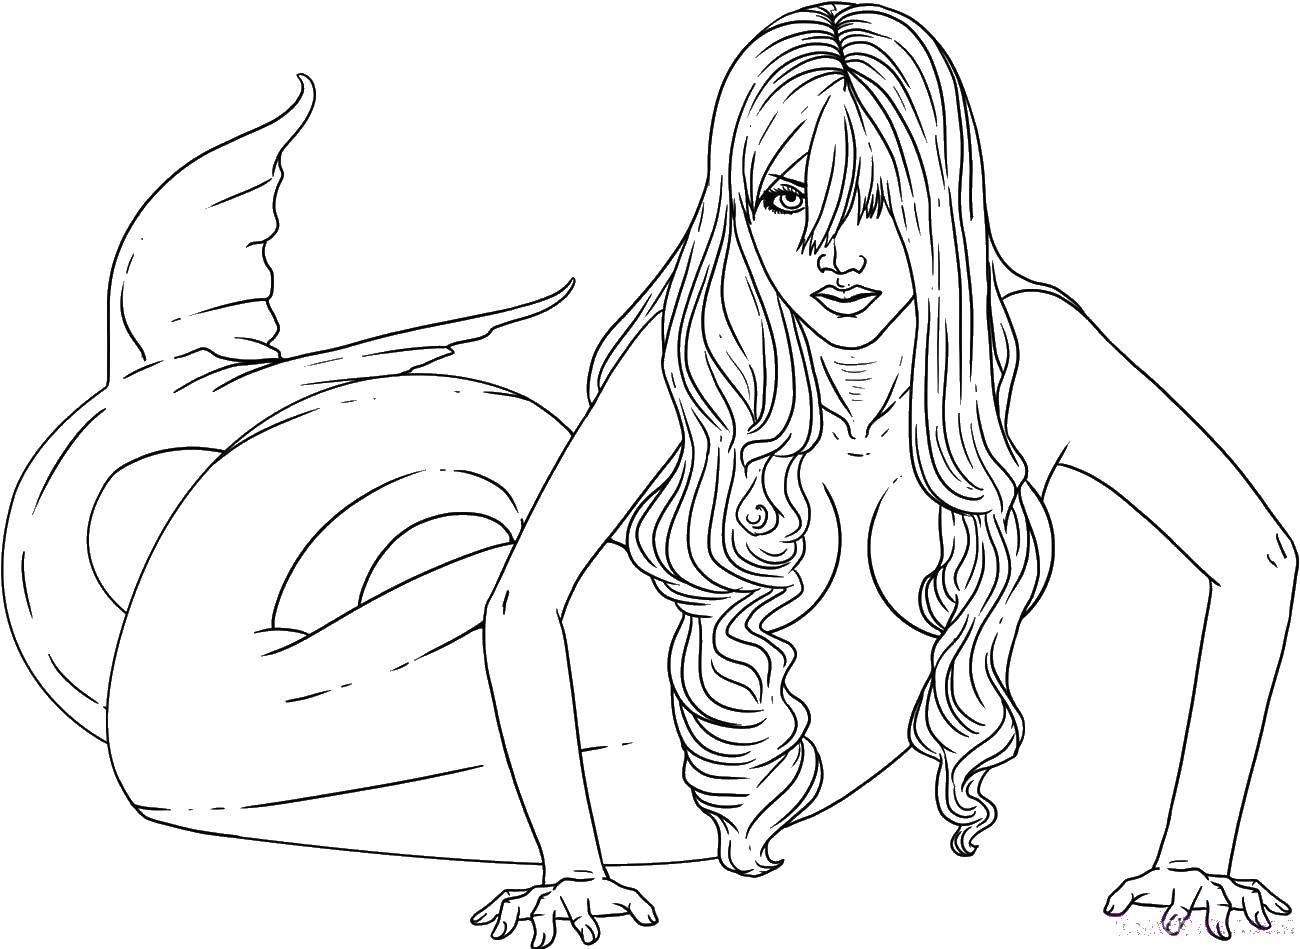 Coloring Beautiful siren. Category The little mermaid. Tags:  the little mermaid, mermaids, sirens.